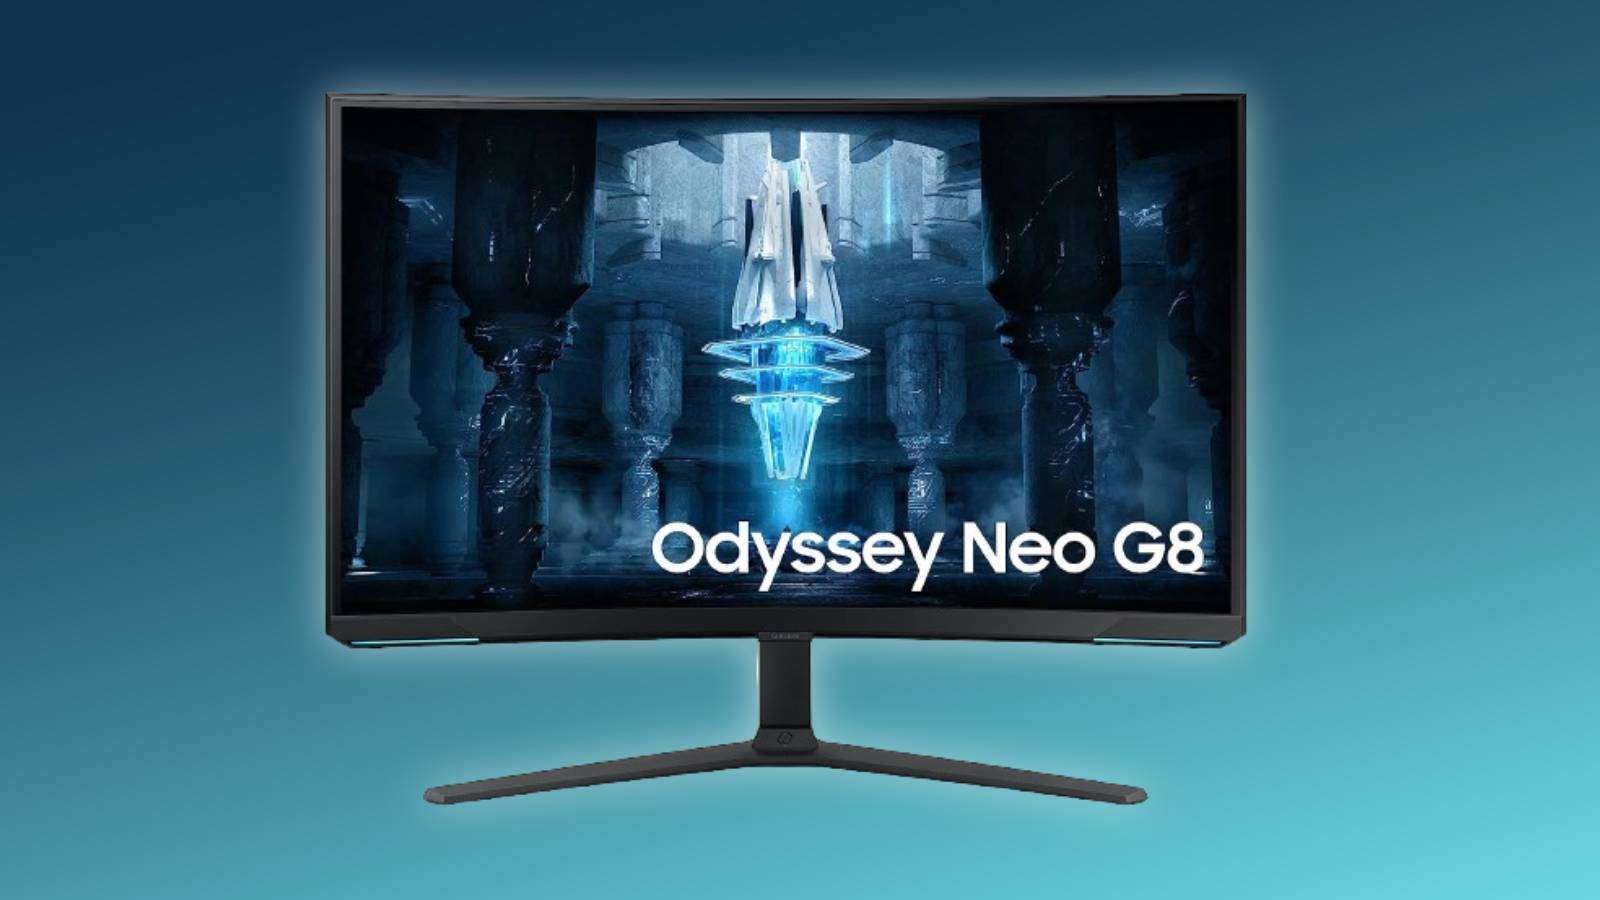 Image of the SAMSUNG 32" Odyssey Neo G8 4K UHD 240Hz 1ms G-Sync 1000R Curved Gaming Monitor on a blue and dark blue background.